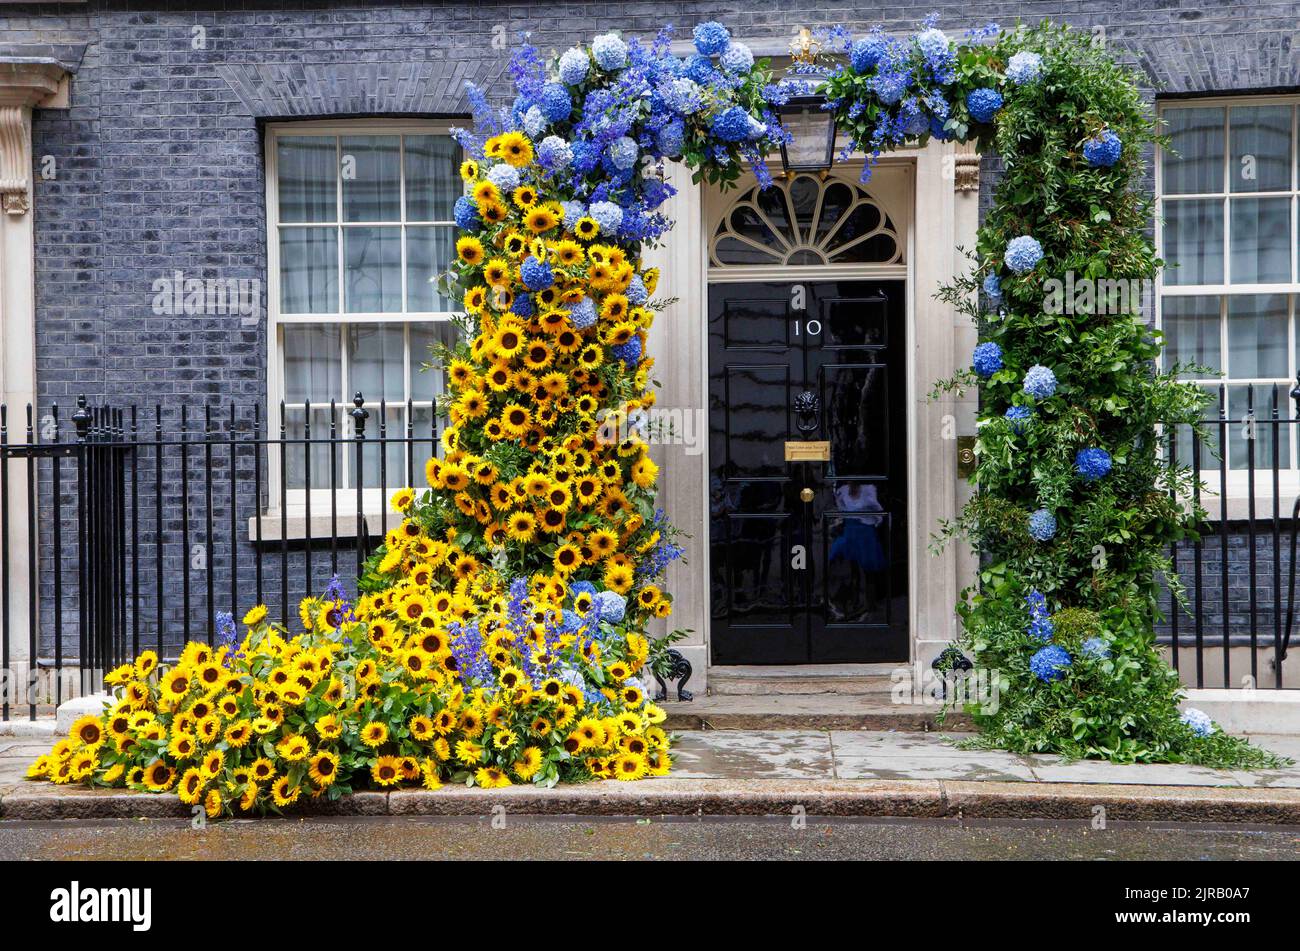 London, UK. 23rd Aug, 2022. The finished display at Number 10 for Independence day for Ukraine. The finishing touches are put on the floral display at Number 10 Downing Street to mark independence day for Ukraine which is tomorrow, August 24th. Credit: Mark Thomas/Alamy Live News Stock Photo